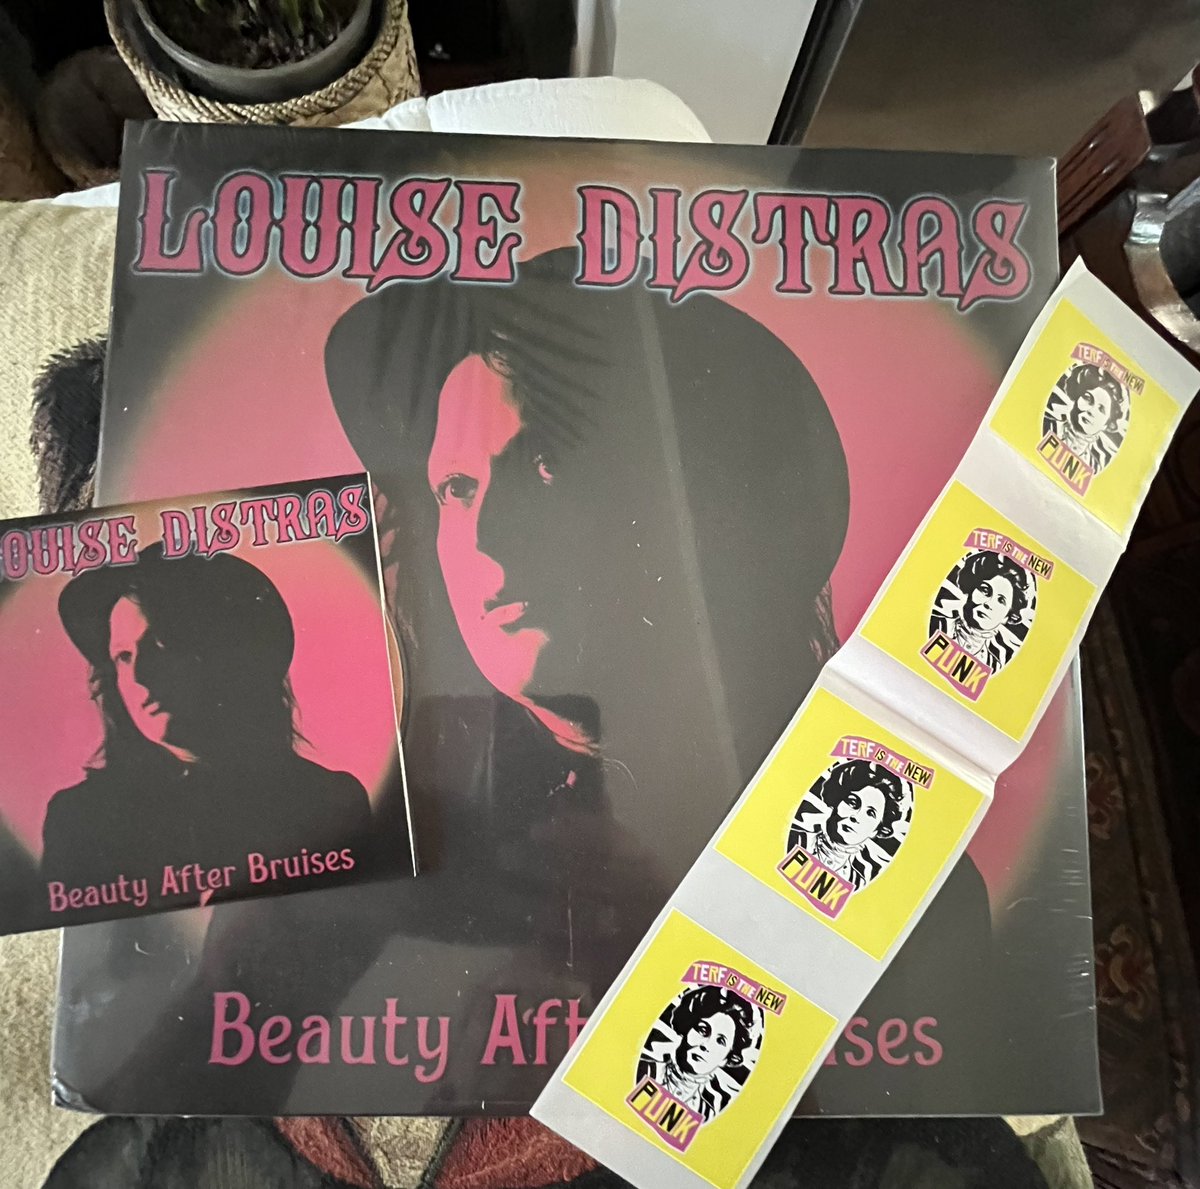 Eeek! It’s going to be one of those punky days…thank you @LouiseDistras …in the mosh pit already 🤟😘😘😘